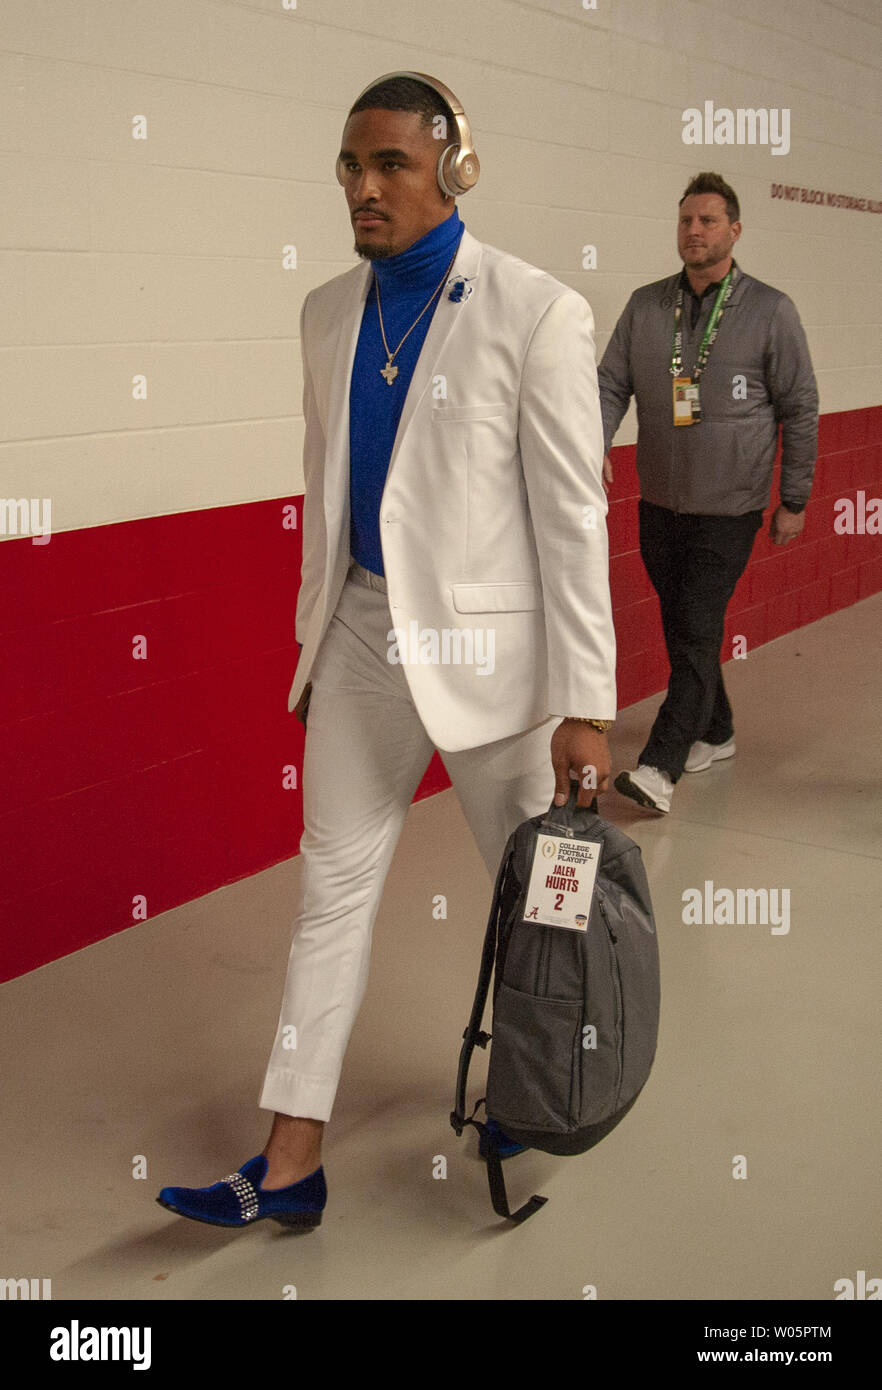 Jalen Hurts Pregame Outfits Remain Undefeated - Sports Illustrated